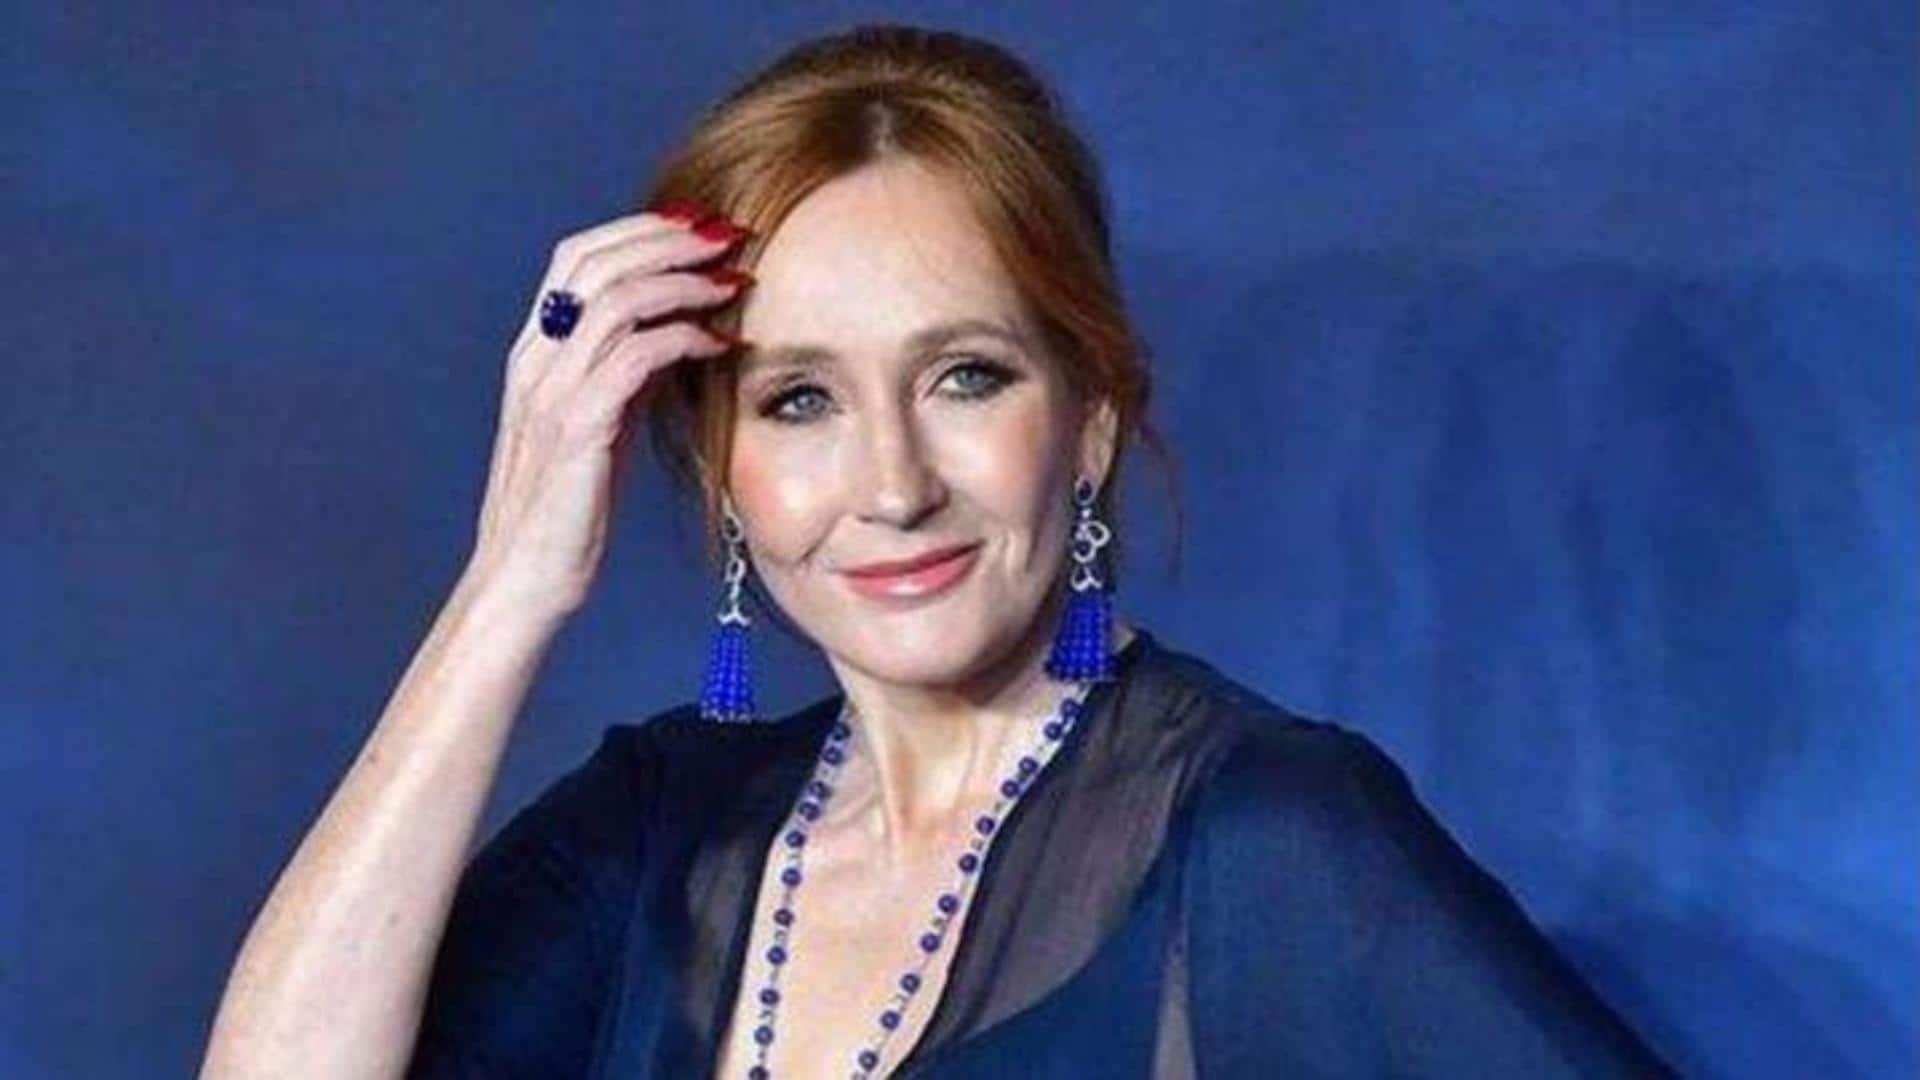 JK Rowling associated with new 'Harry Potter' series? Makers clarify